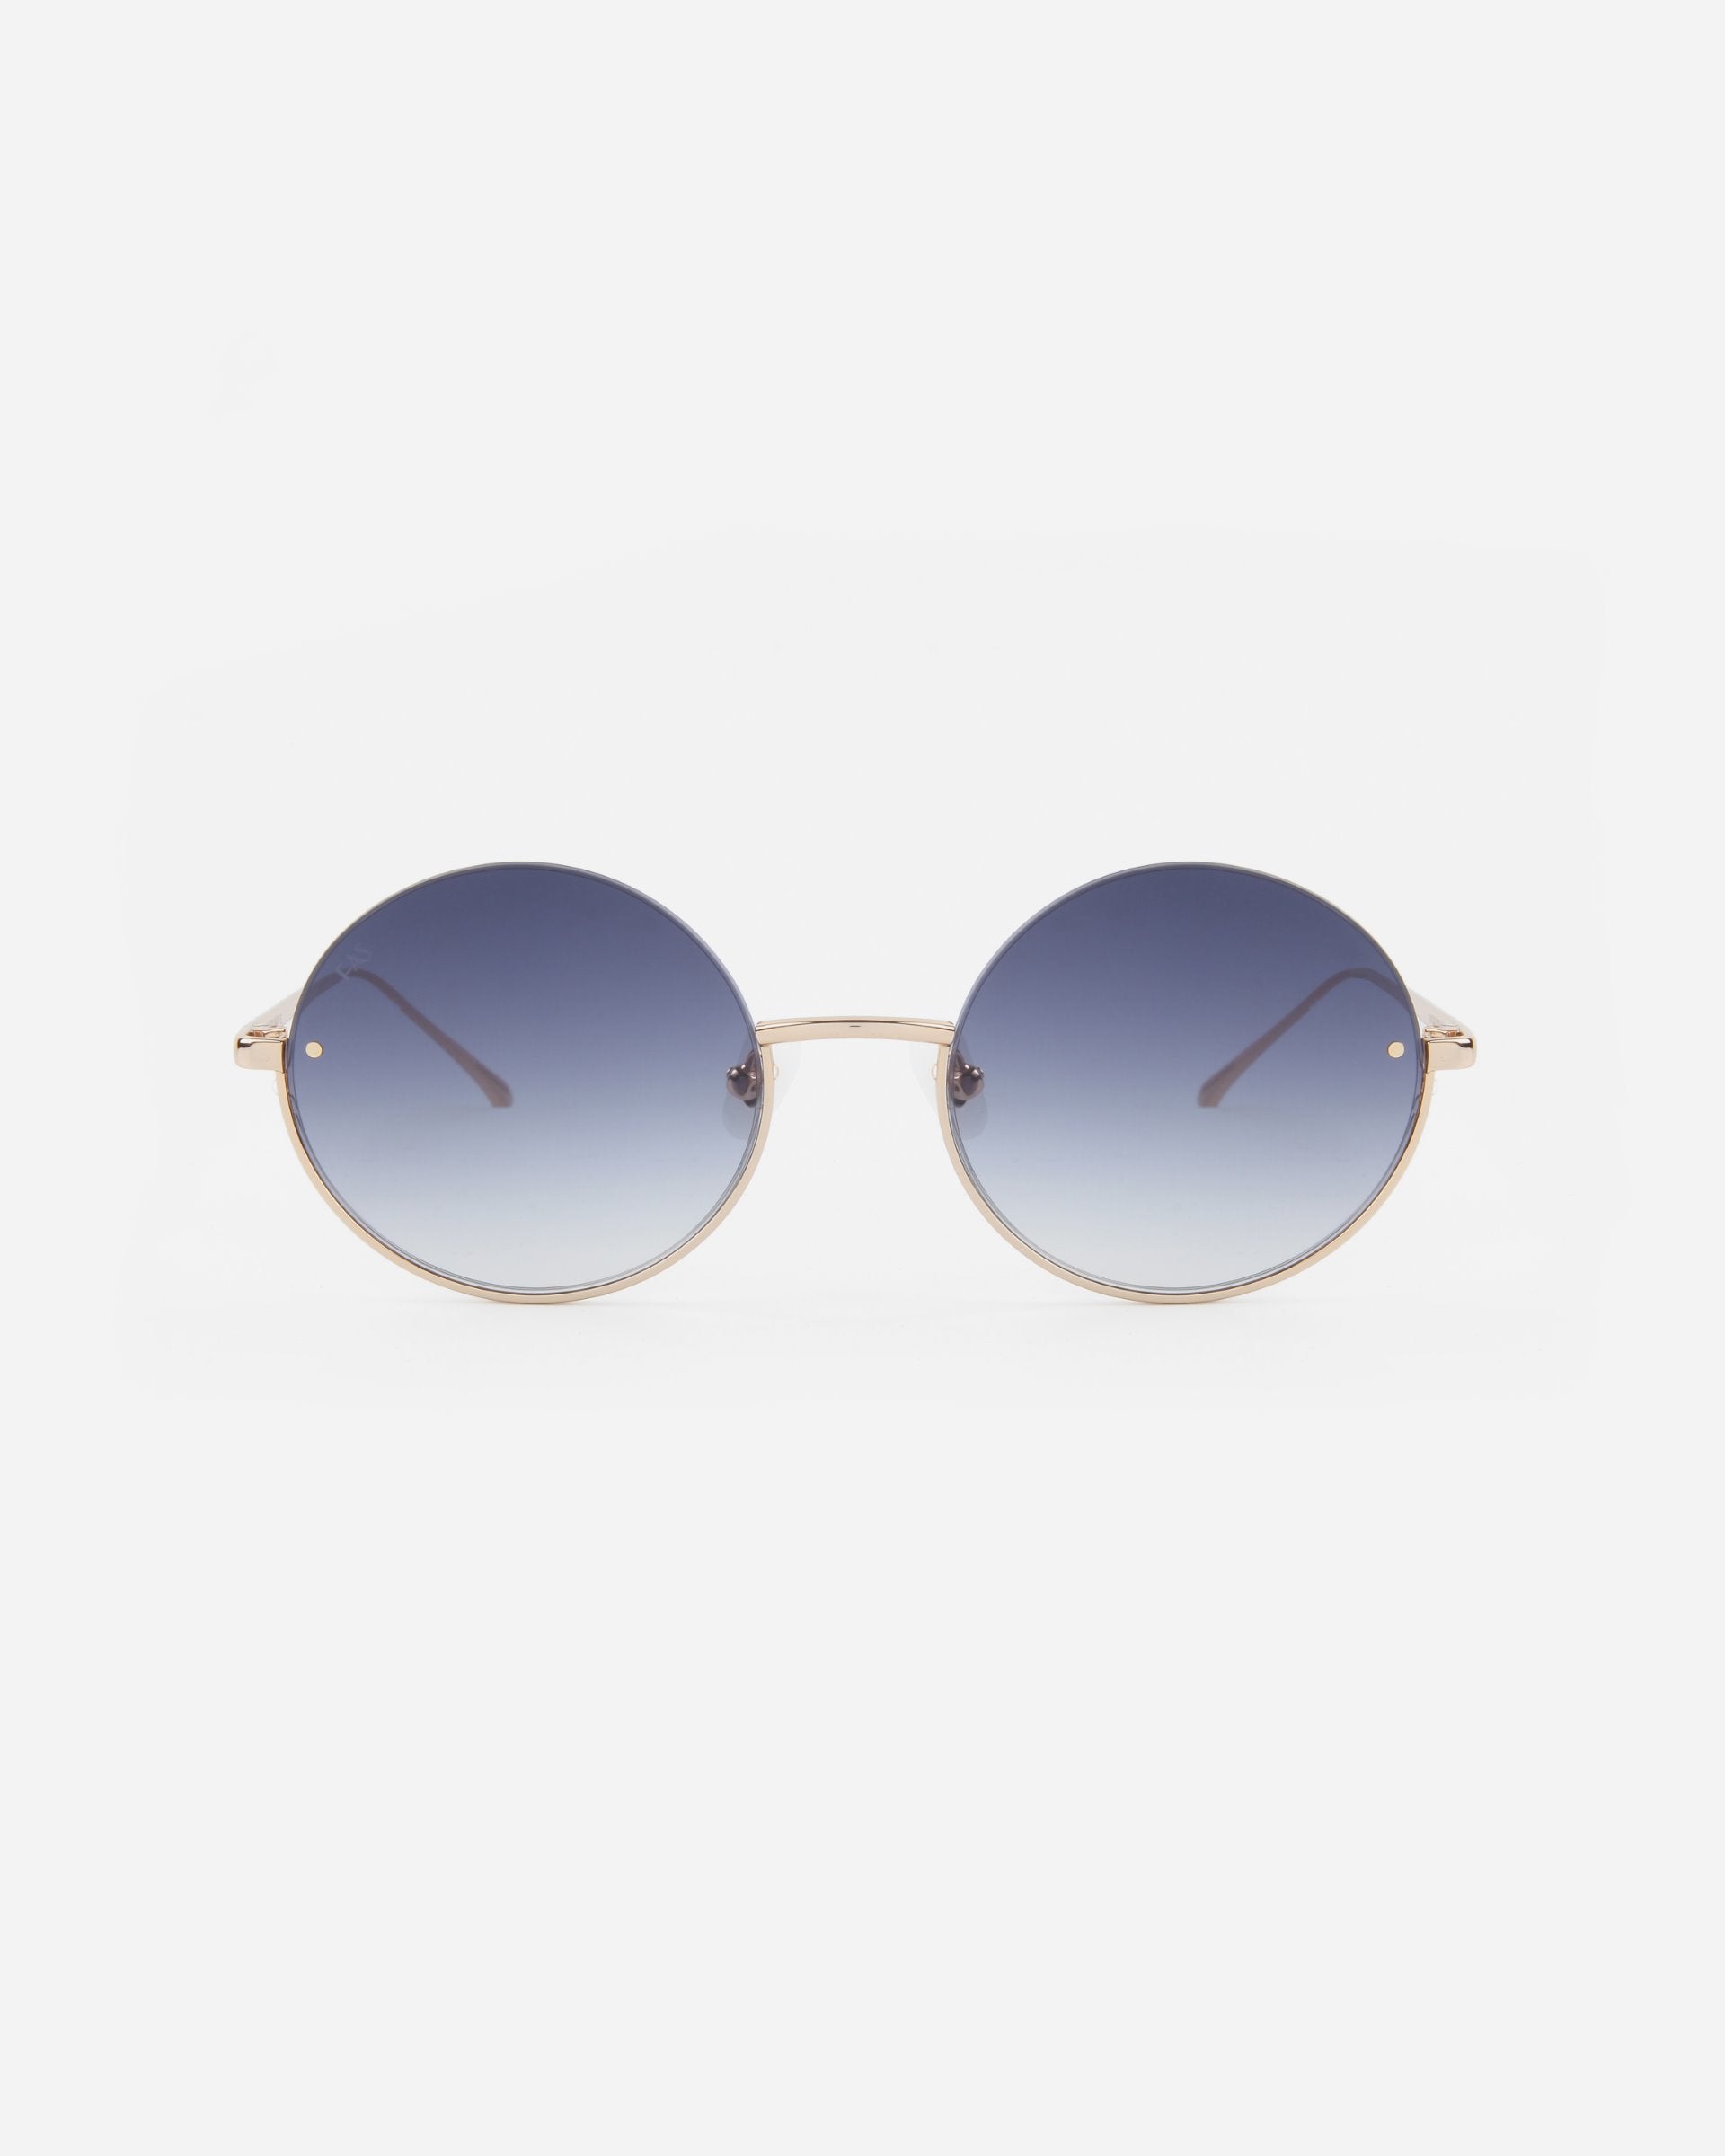 A pair of Skyline sunglasses by For Art's Sake® with gradient nylon lenses fading from dark blue at the top to clear at the bottom. The gold plated stainless steel frames are thin and metallic, featuring a minimalist design with no visible brand markings. These UVA & UVB-protected sunglasses are set against a plain white background.